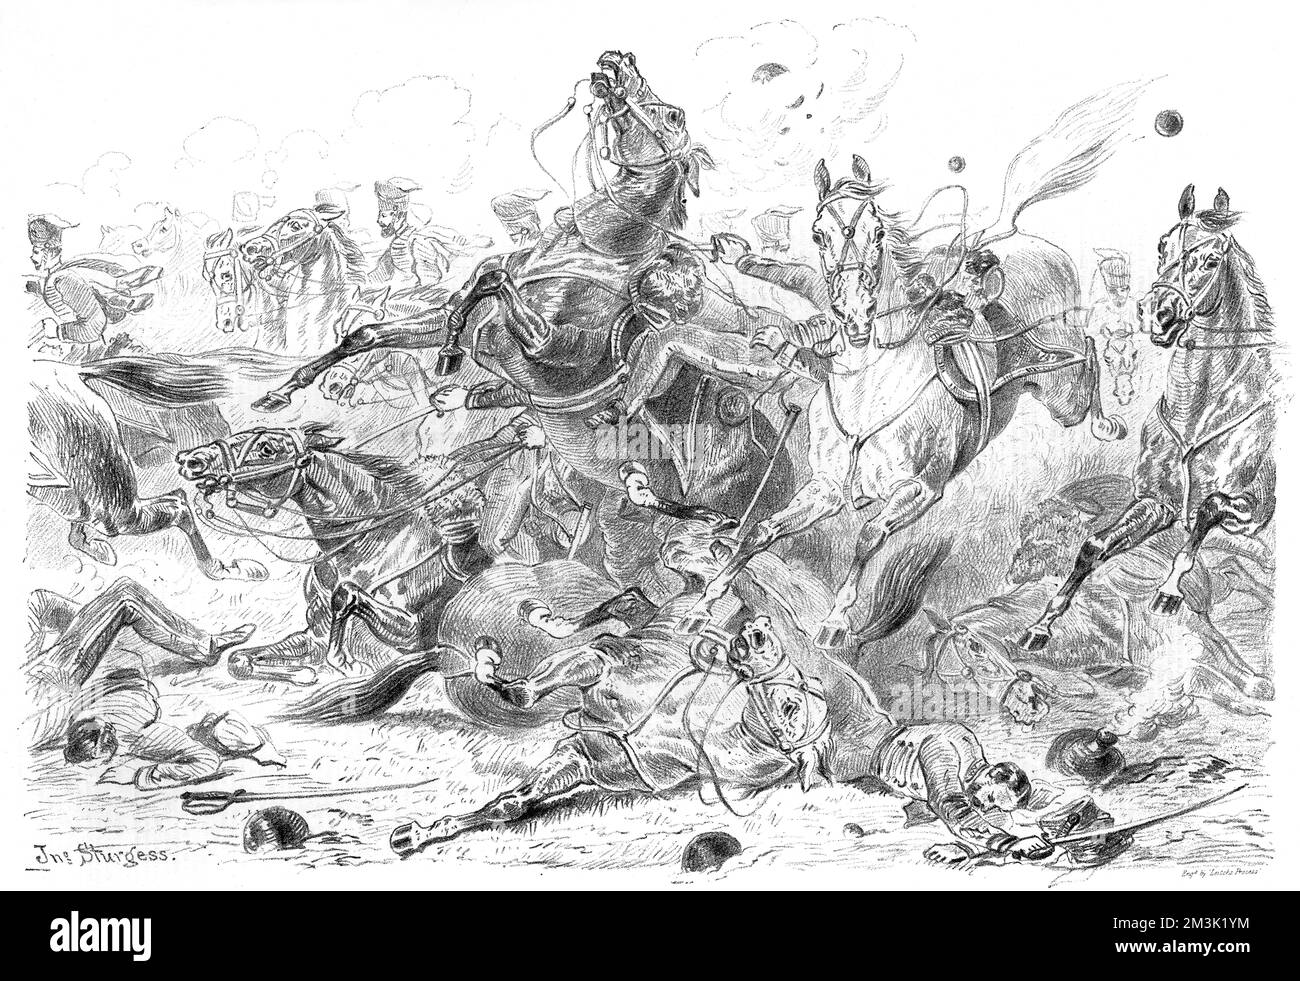 Dramatic process-litho of the charge of the Light Brigade during the Battle of Balaklava, Crimean War focusing on the horses, made 20 years after the event.   This image was originally entitled 'While Horse and Hero Fell'.  1875 Stock Photo